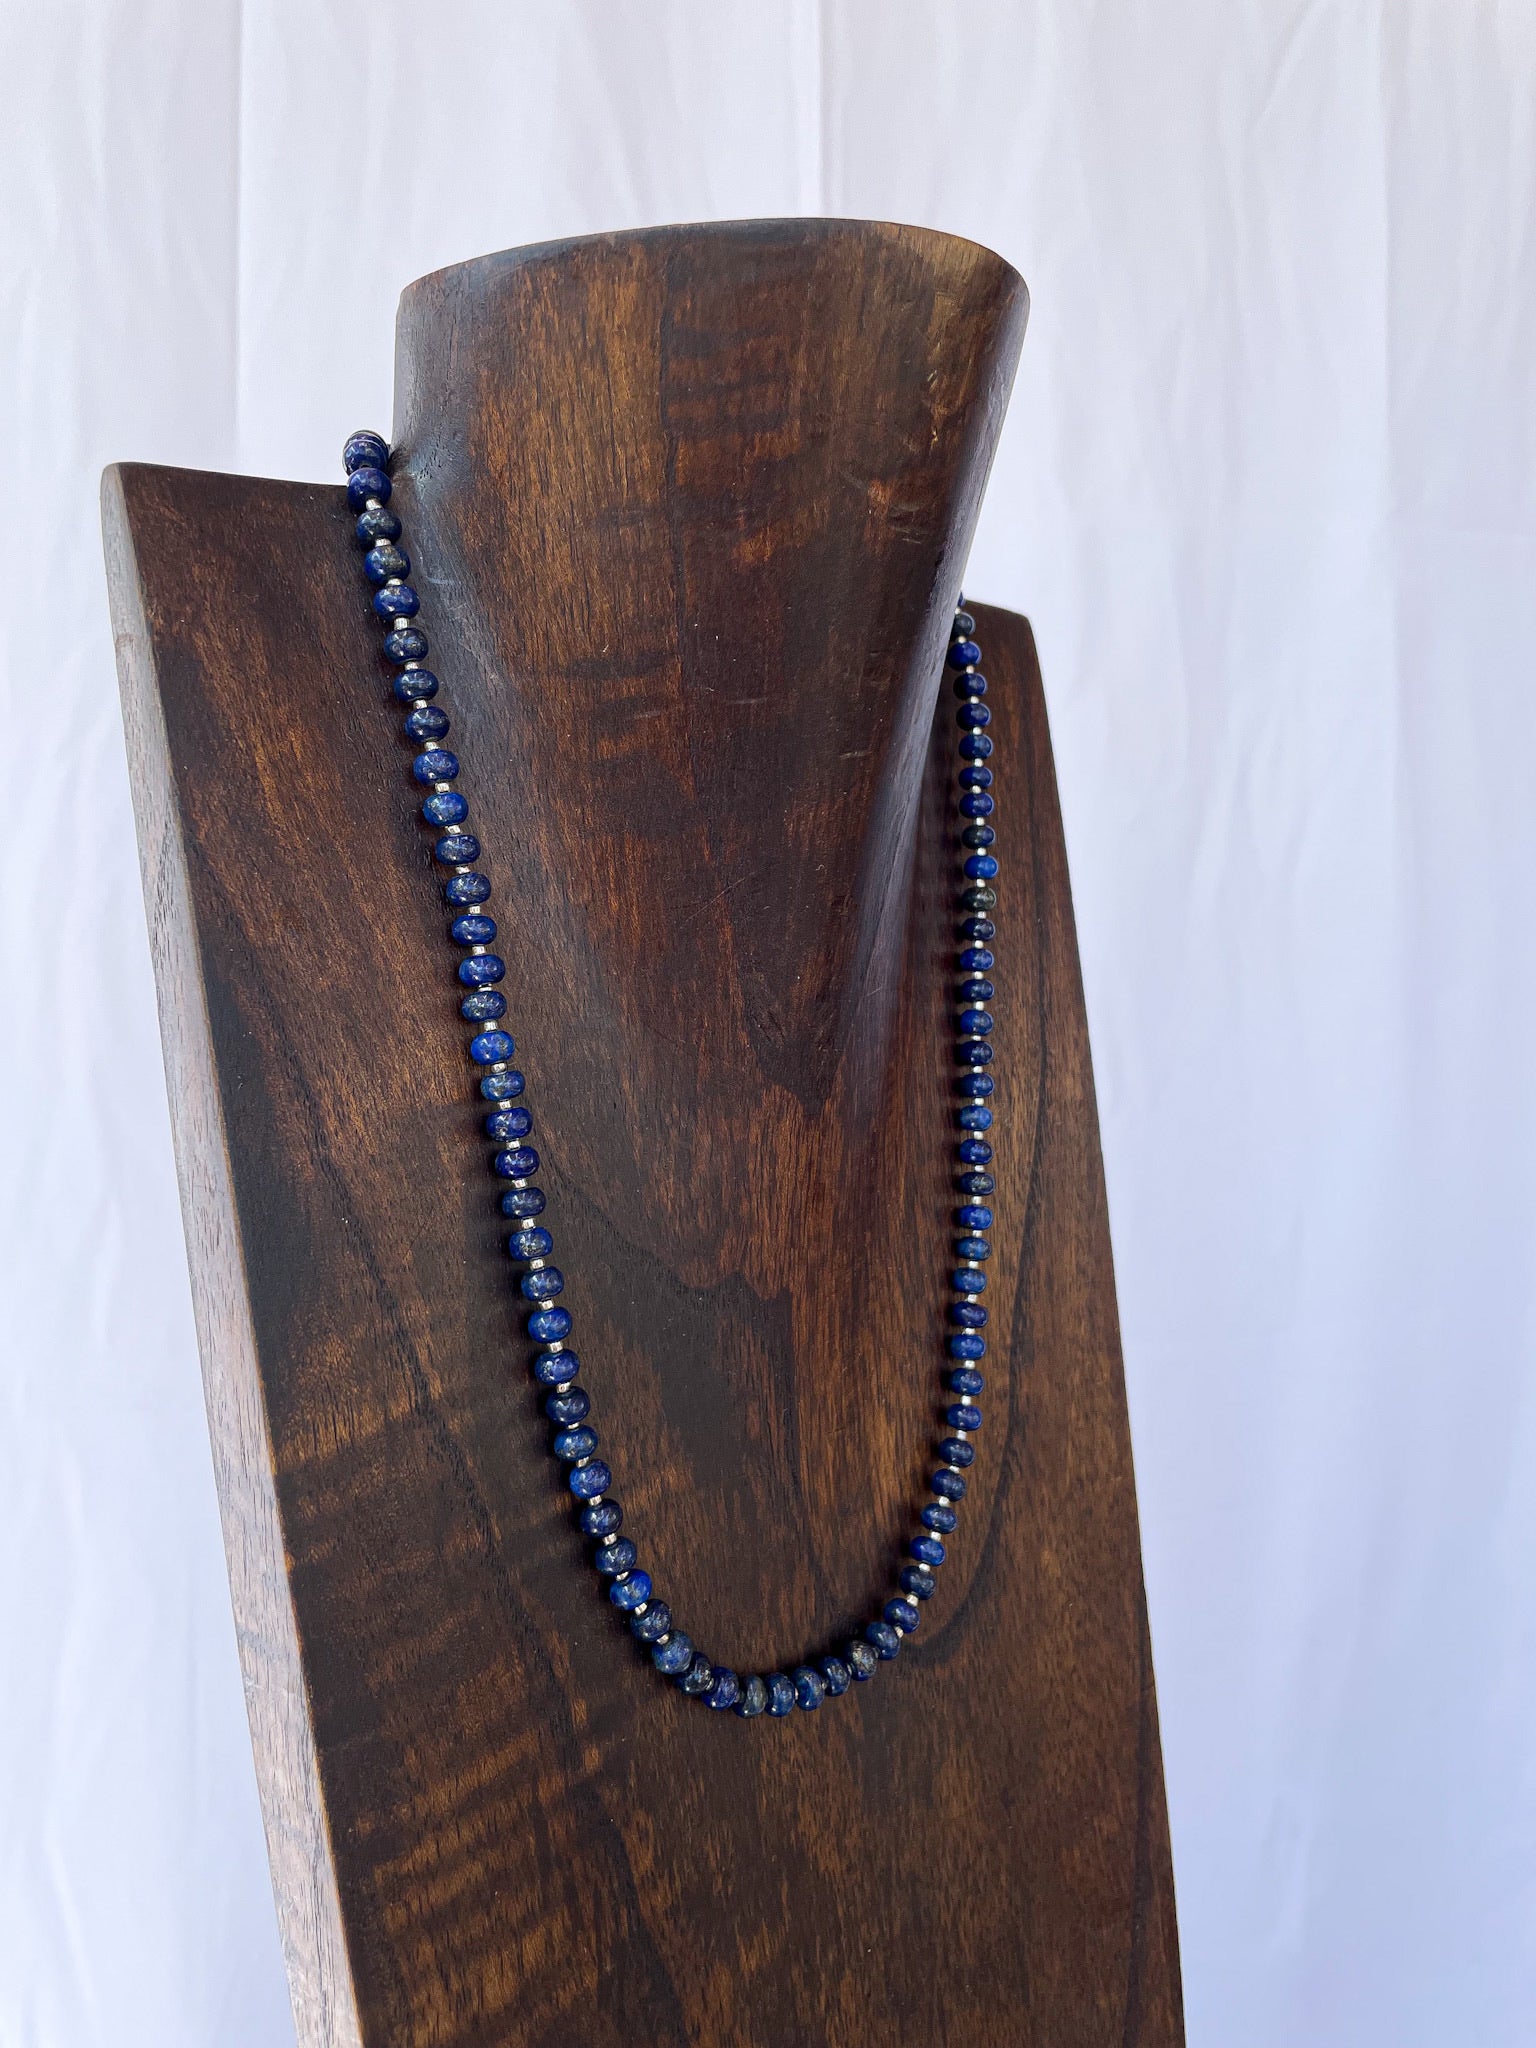 Lapis & Seed Beads Necklace